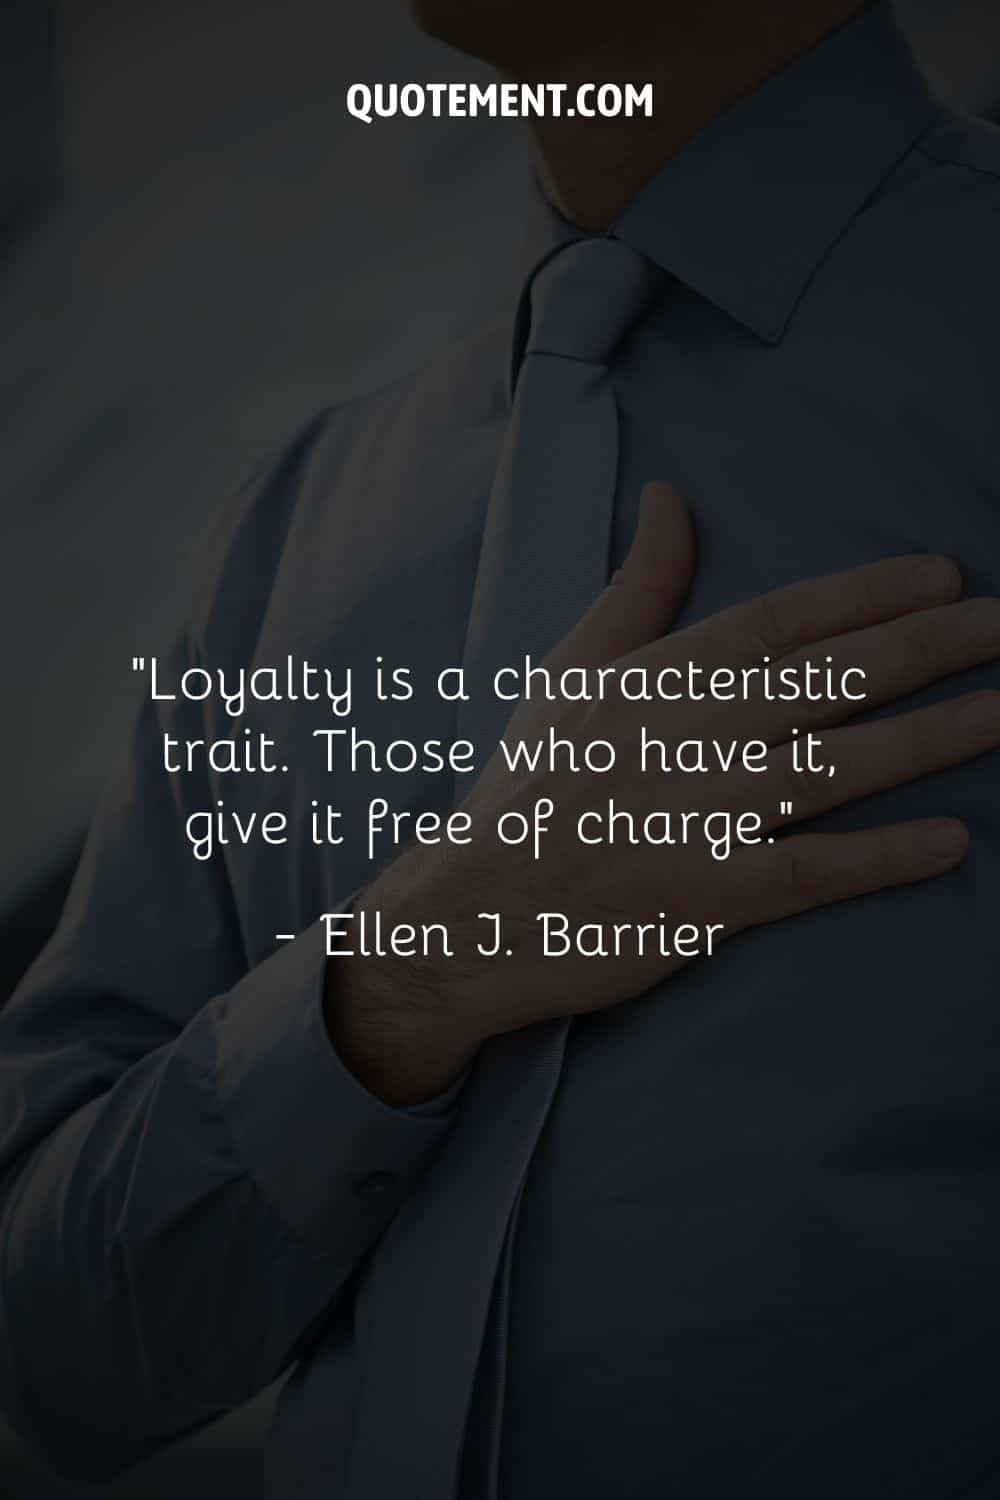 “Loyalty is a characteristic trait. Those who have it, give it free of charge.” ― Ellen J. Barrier